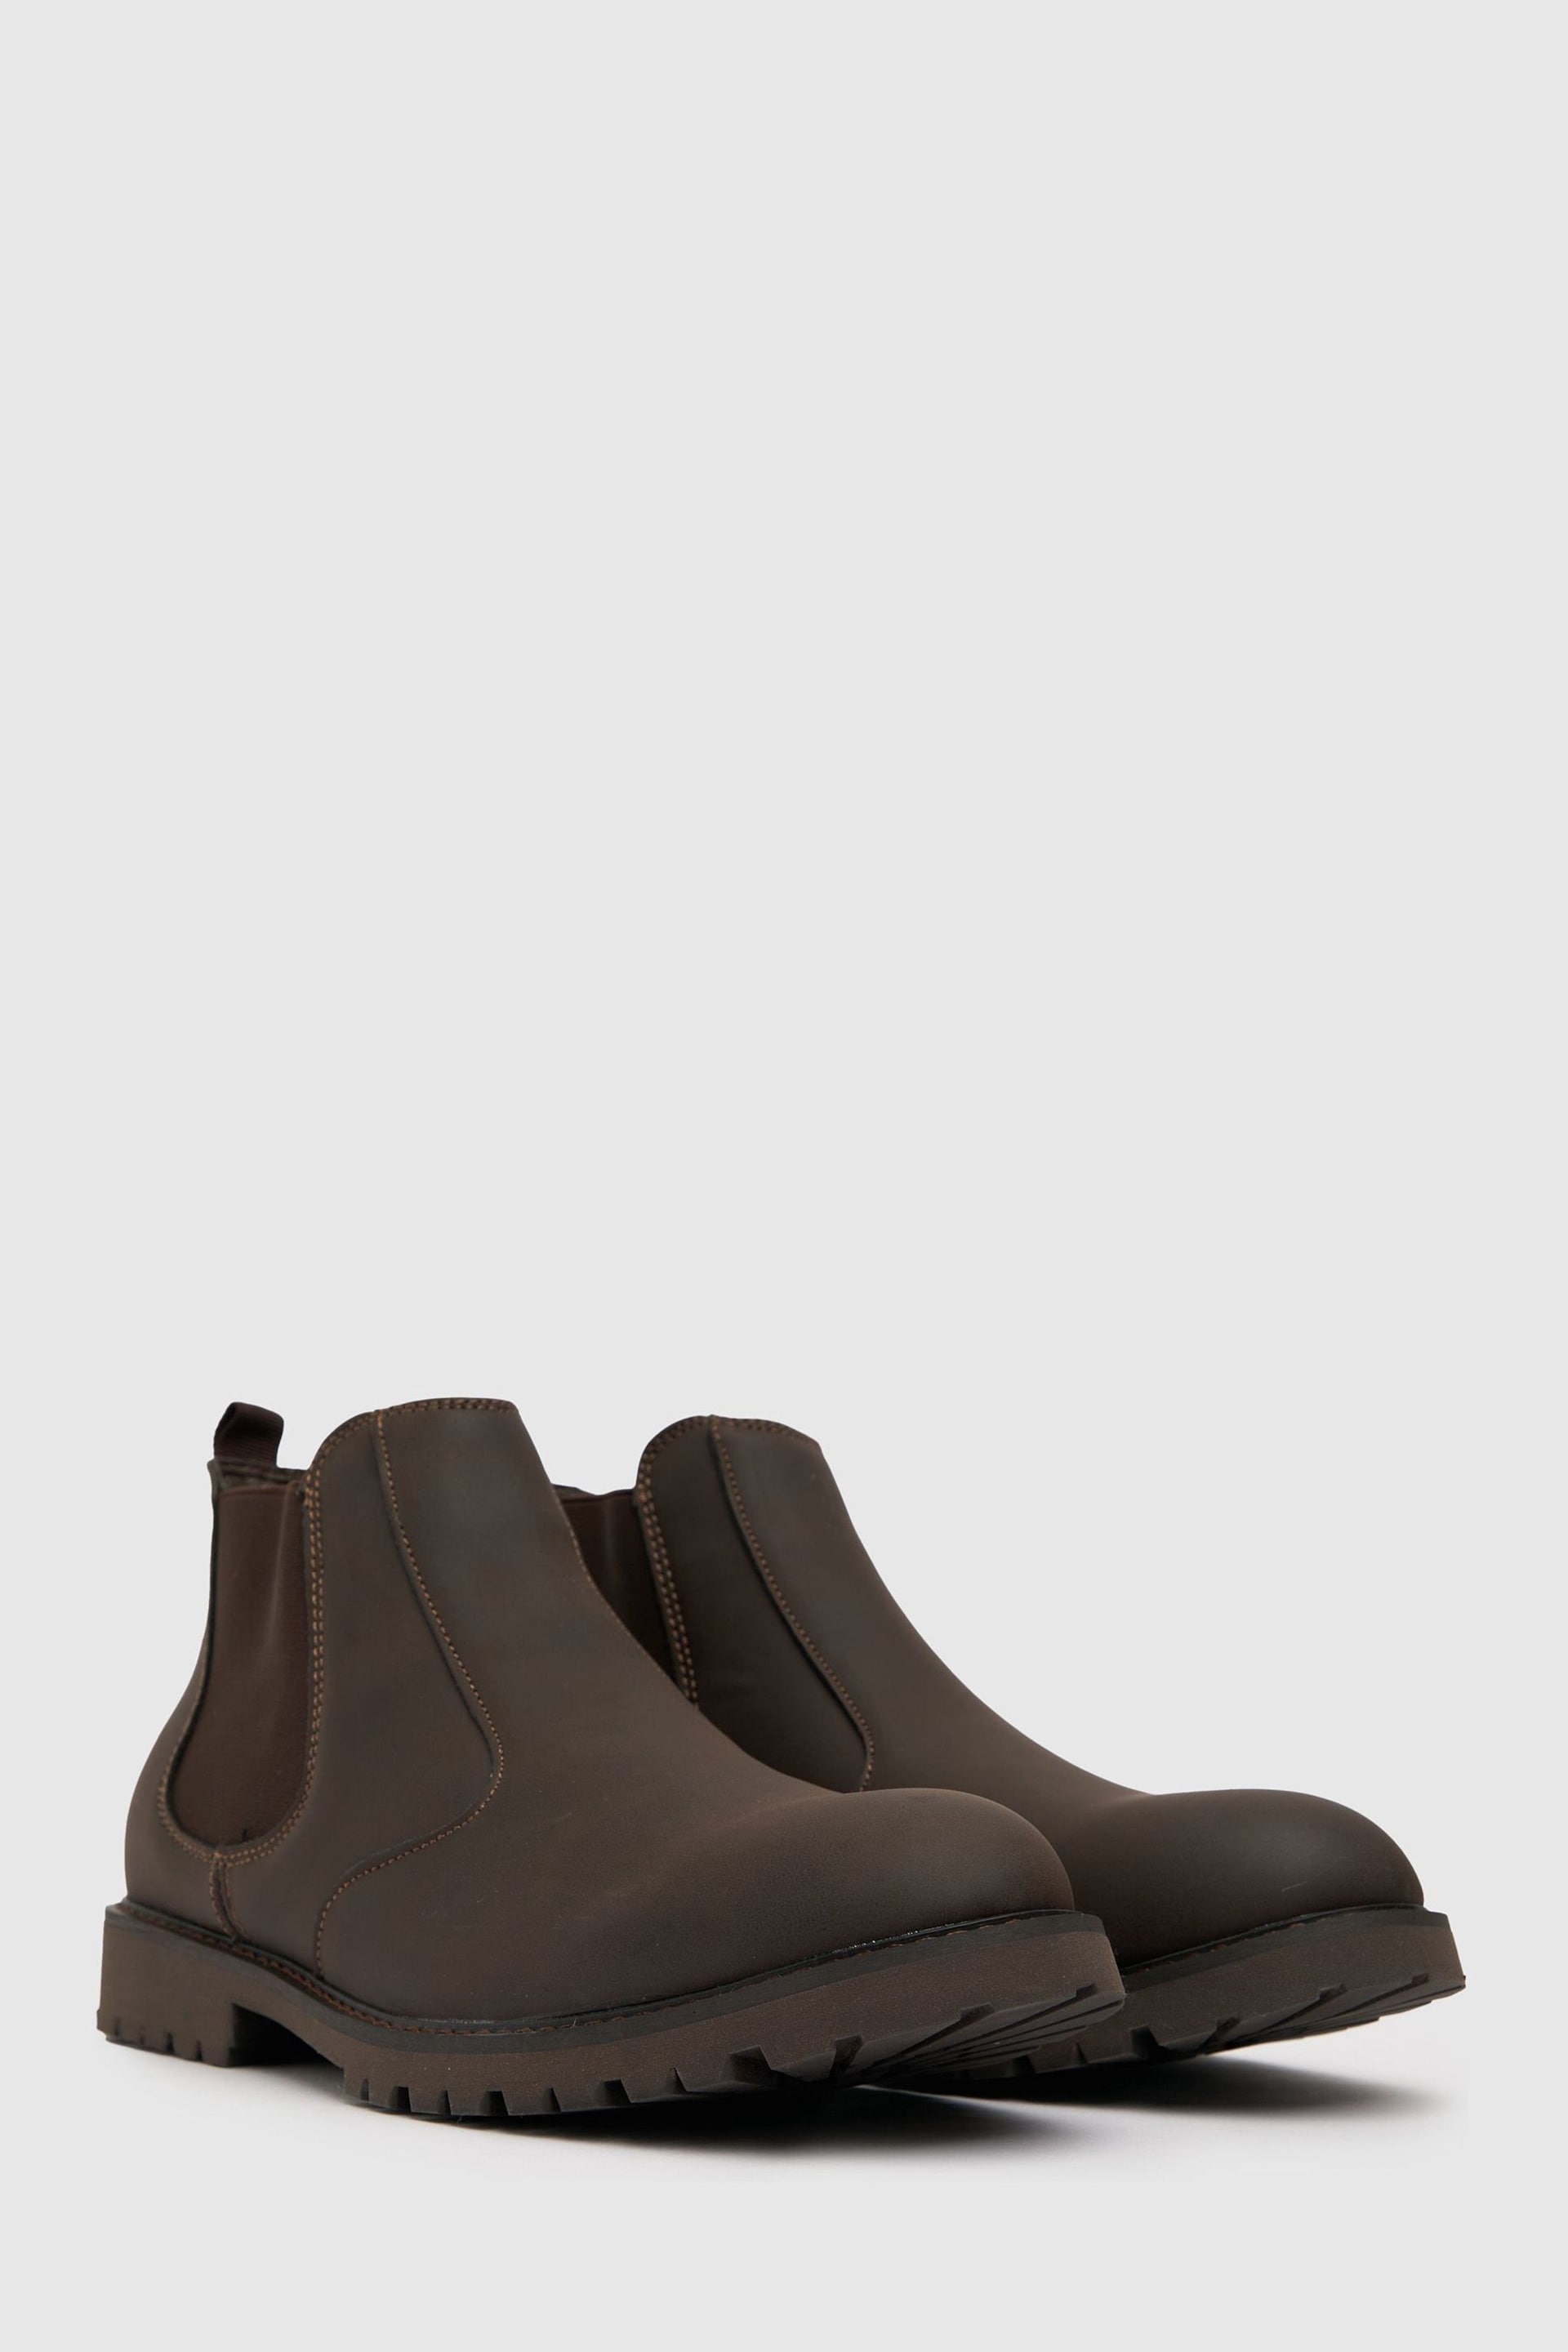 Schuh River Formal Boots - Image 2 of 4